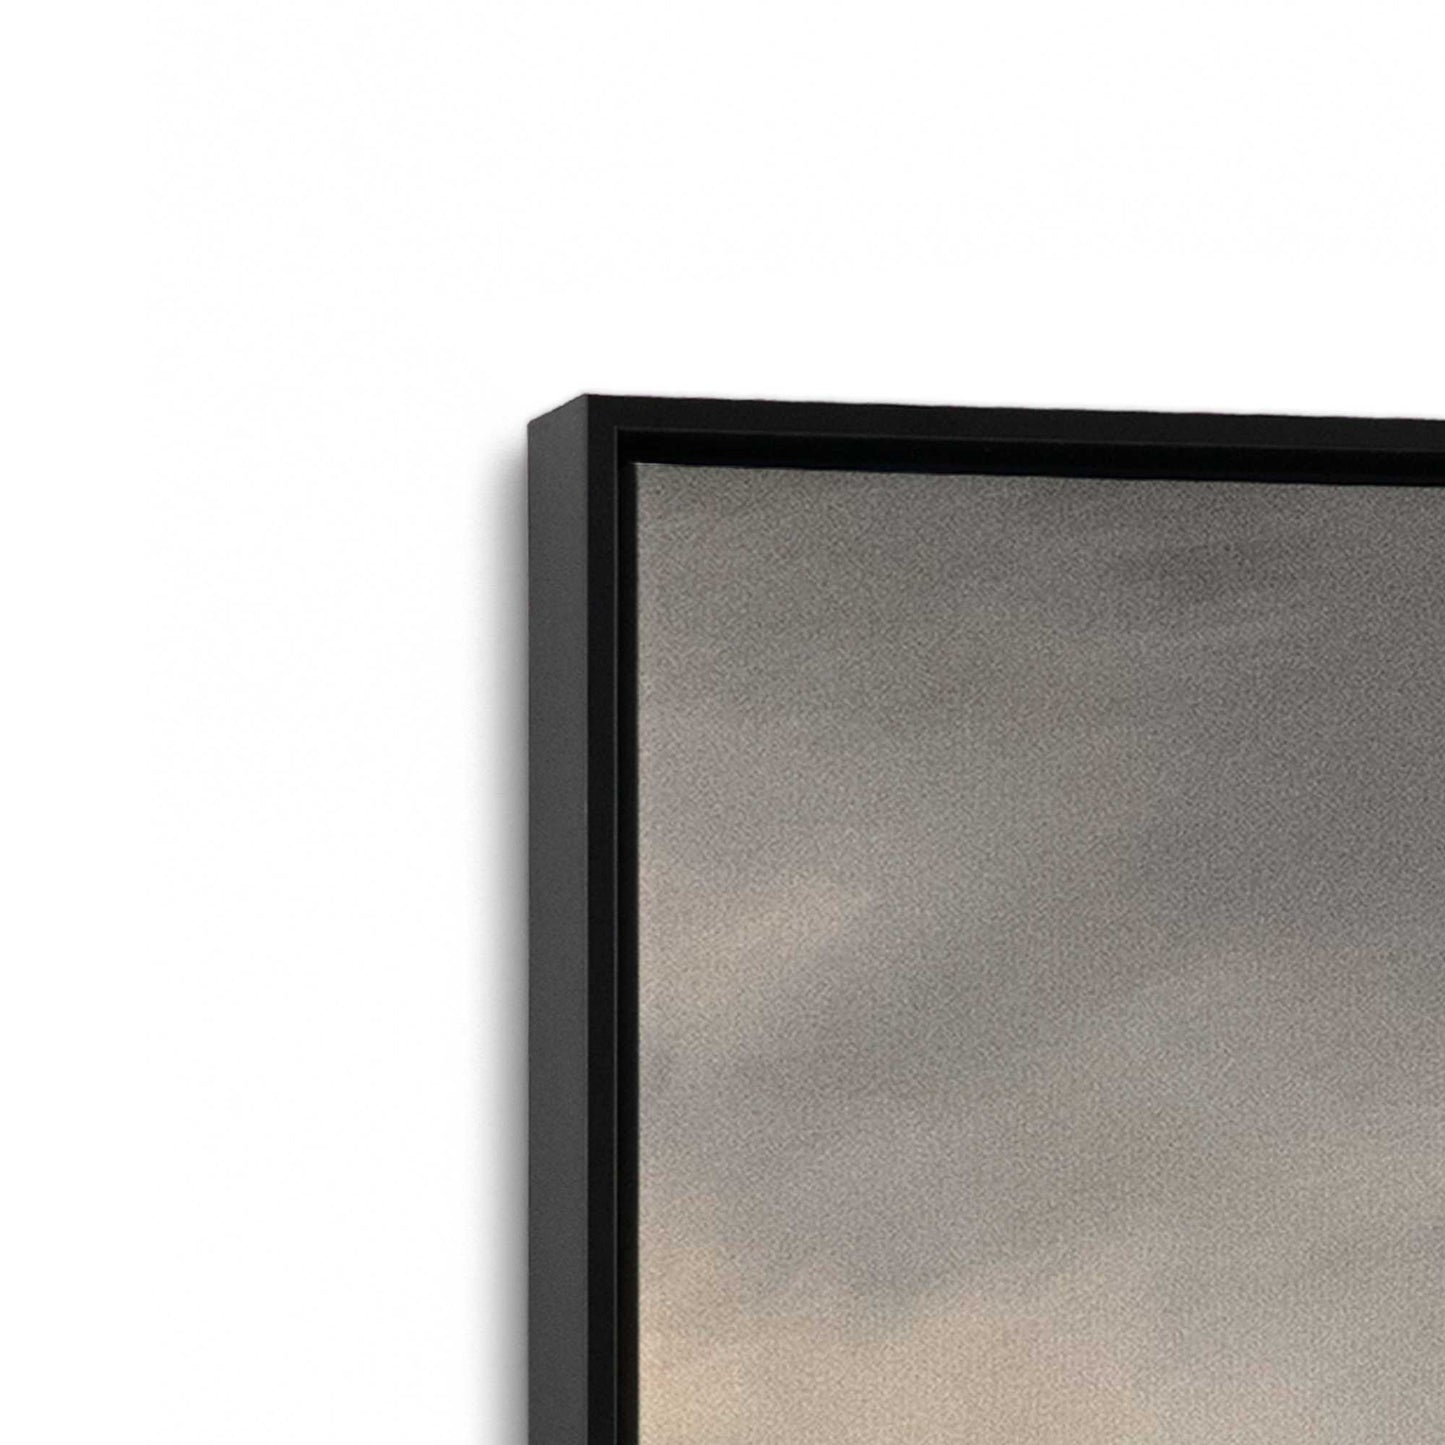 [Color:Satin Black] Picture of the corner of the art